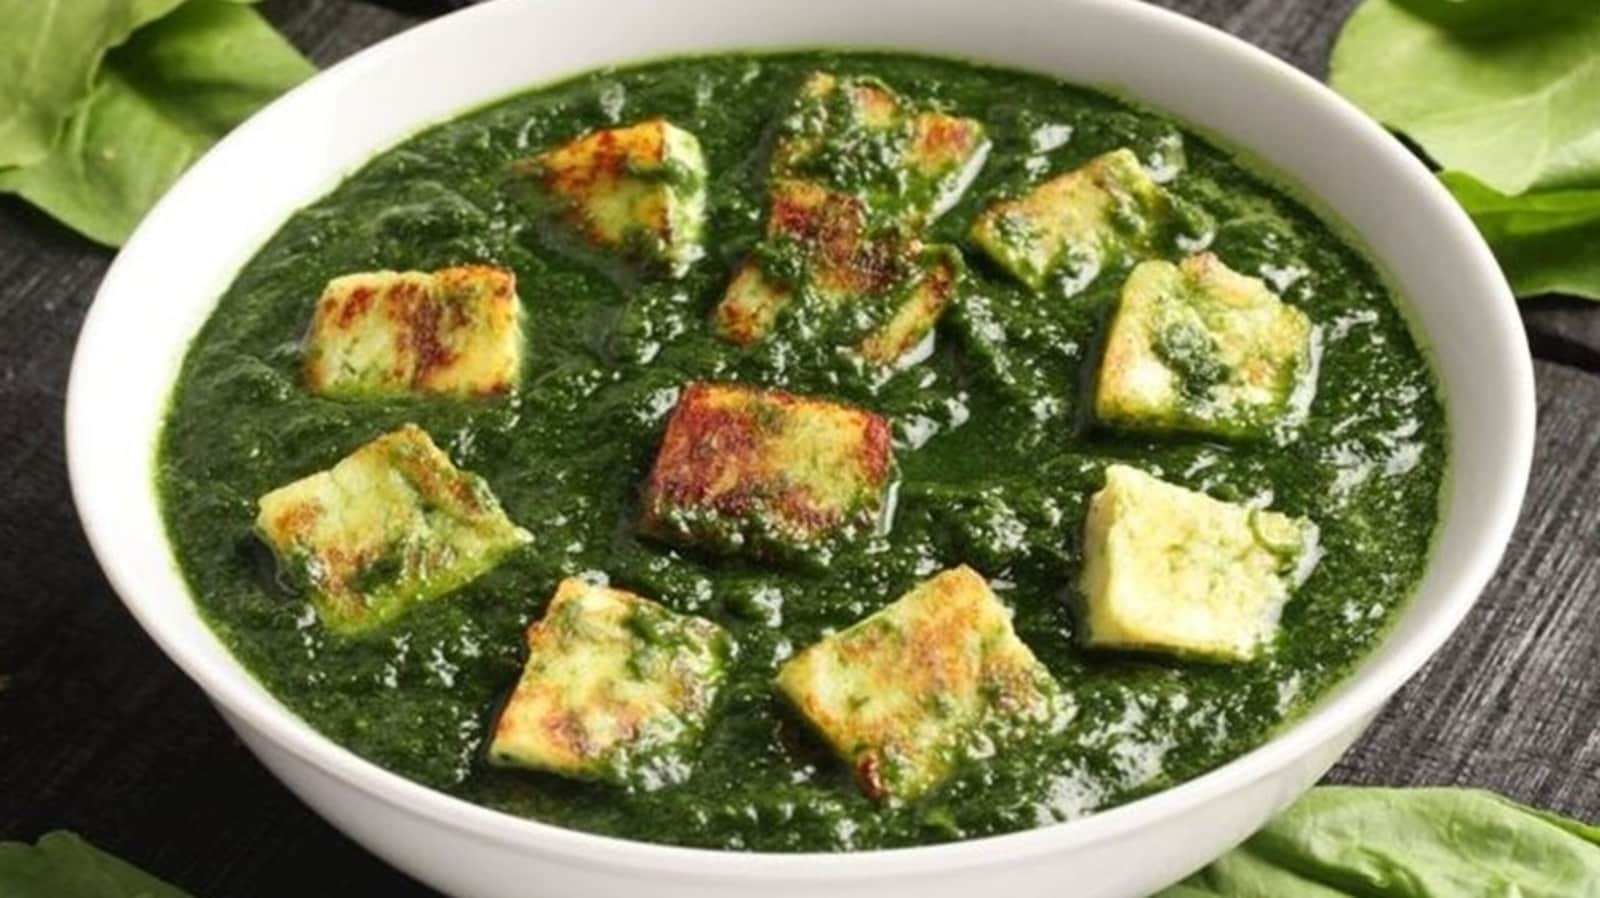 Gorge on palak paneer or palak paratha this winter for amazing health  benefits | Health - Hindustan Times